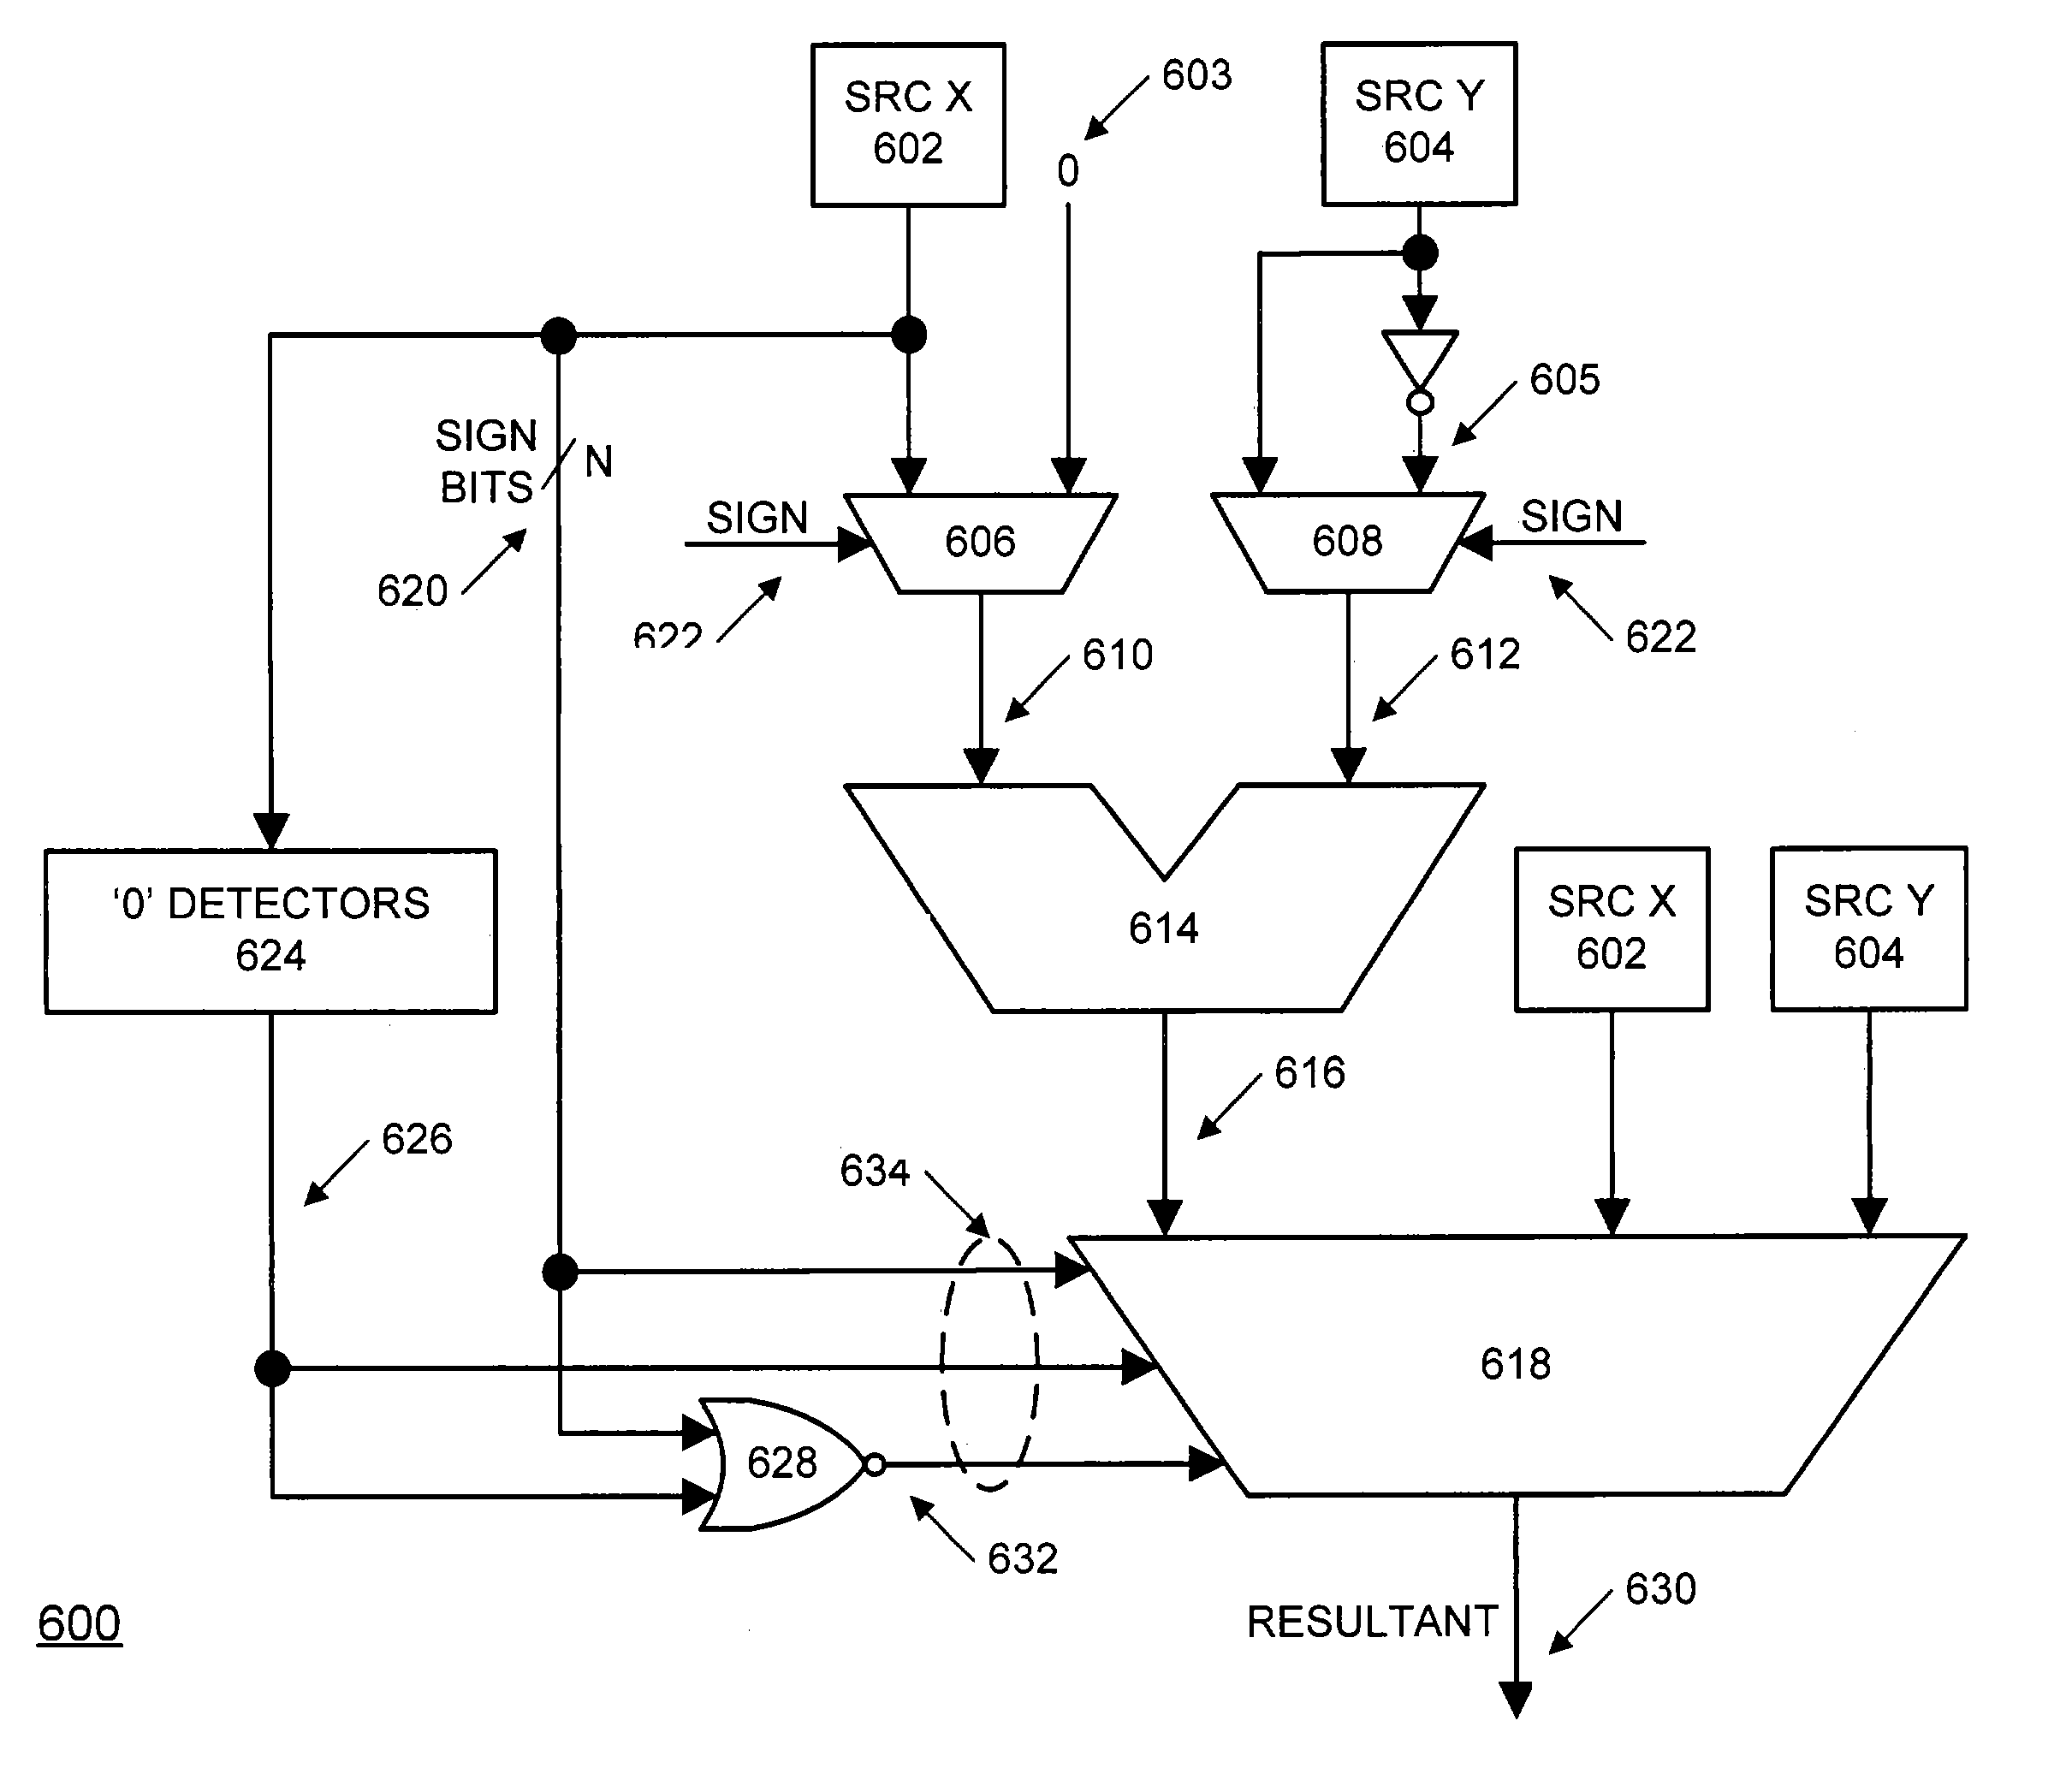 Nonlinear filtering and deblocking applications utilizing SIMD sign and absolute value operations